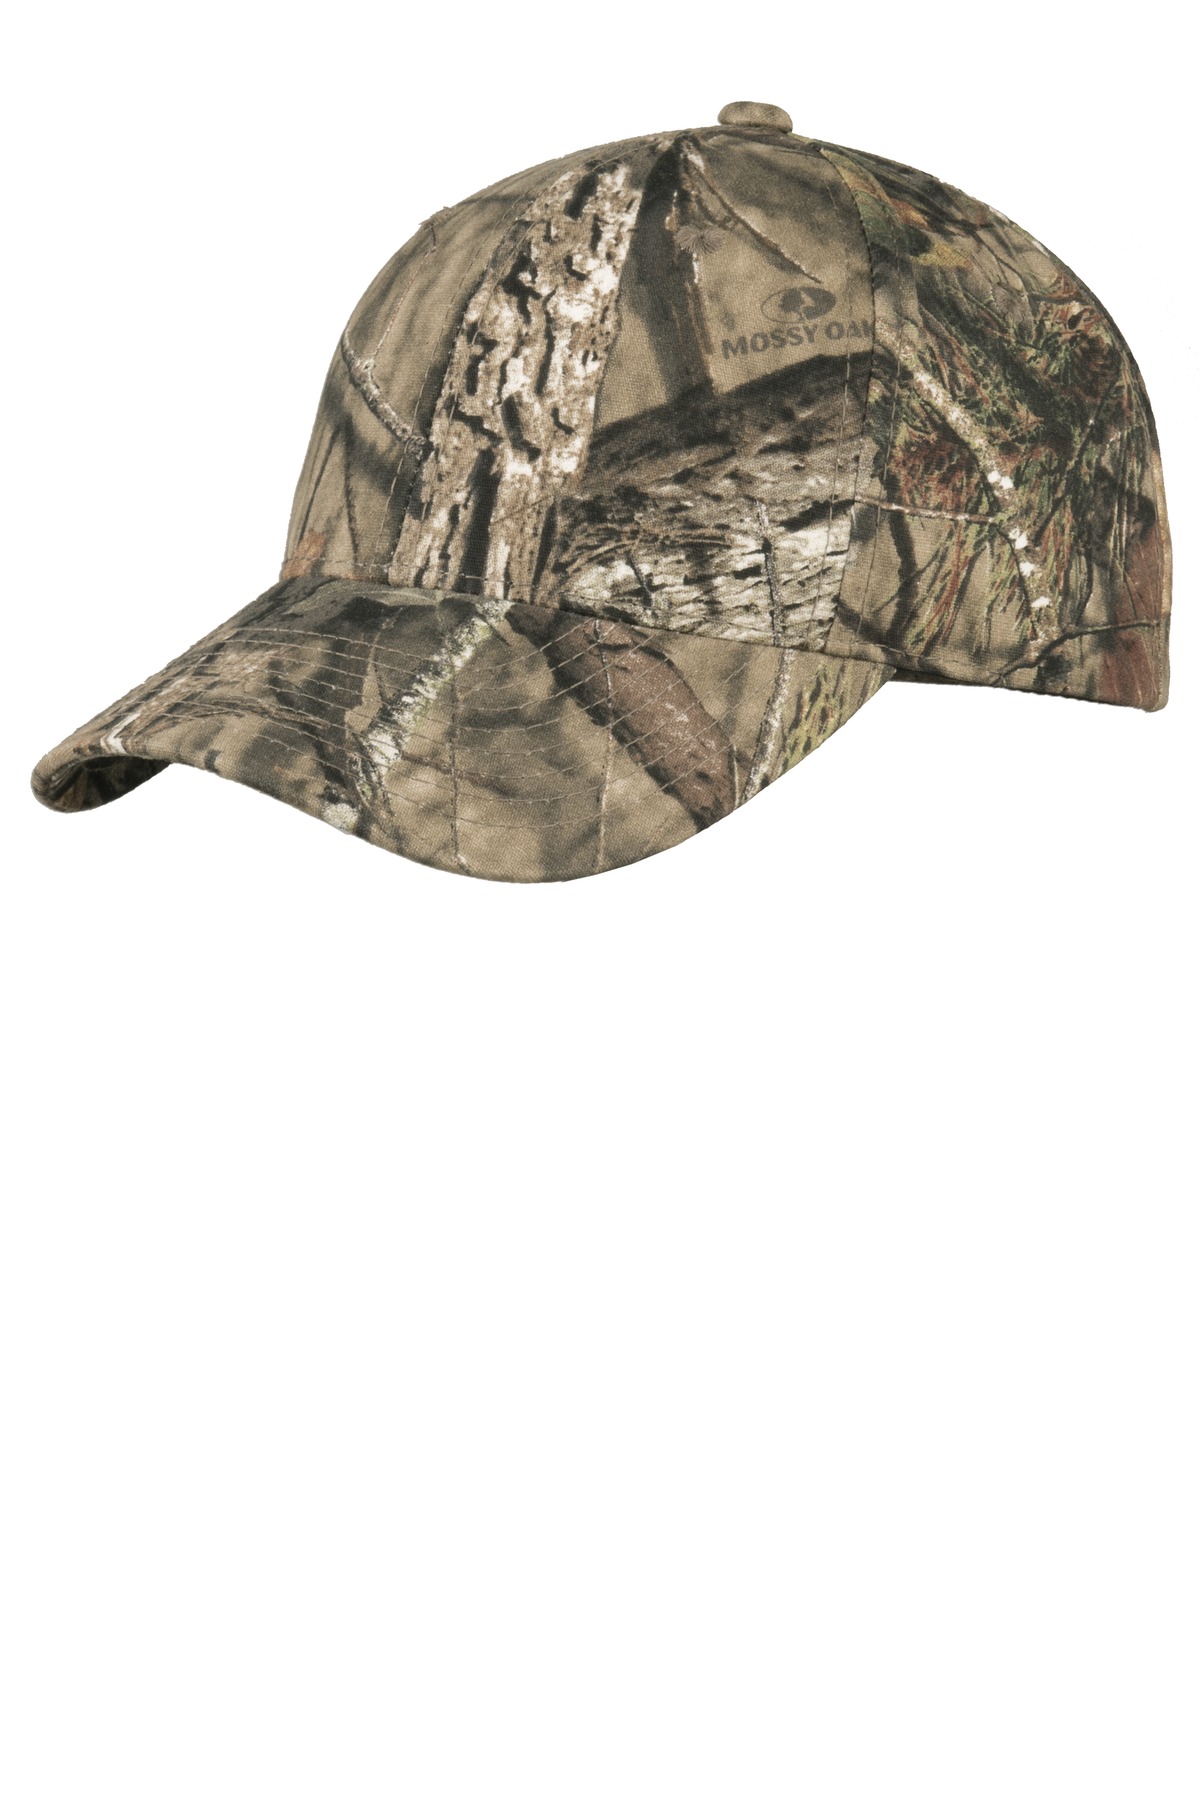 Selected Color is Mossy Oak Break-Up Country